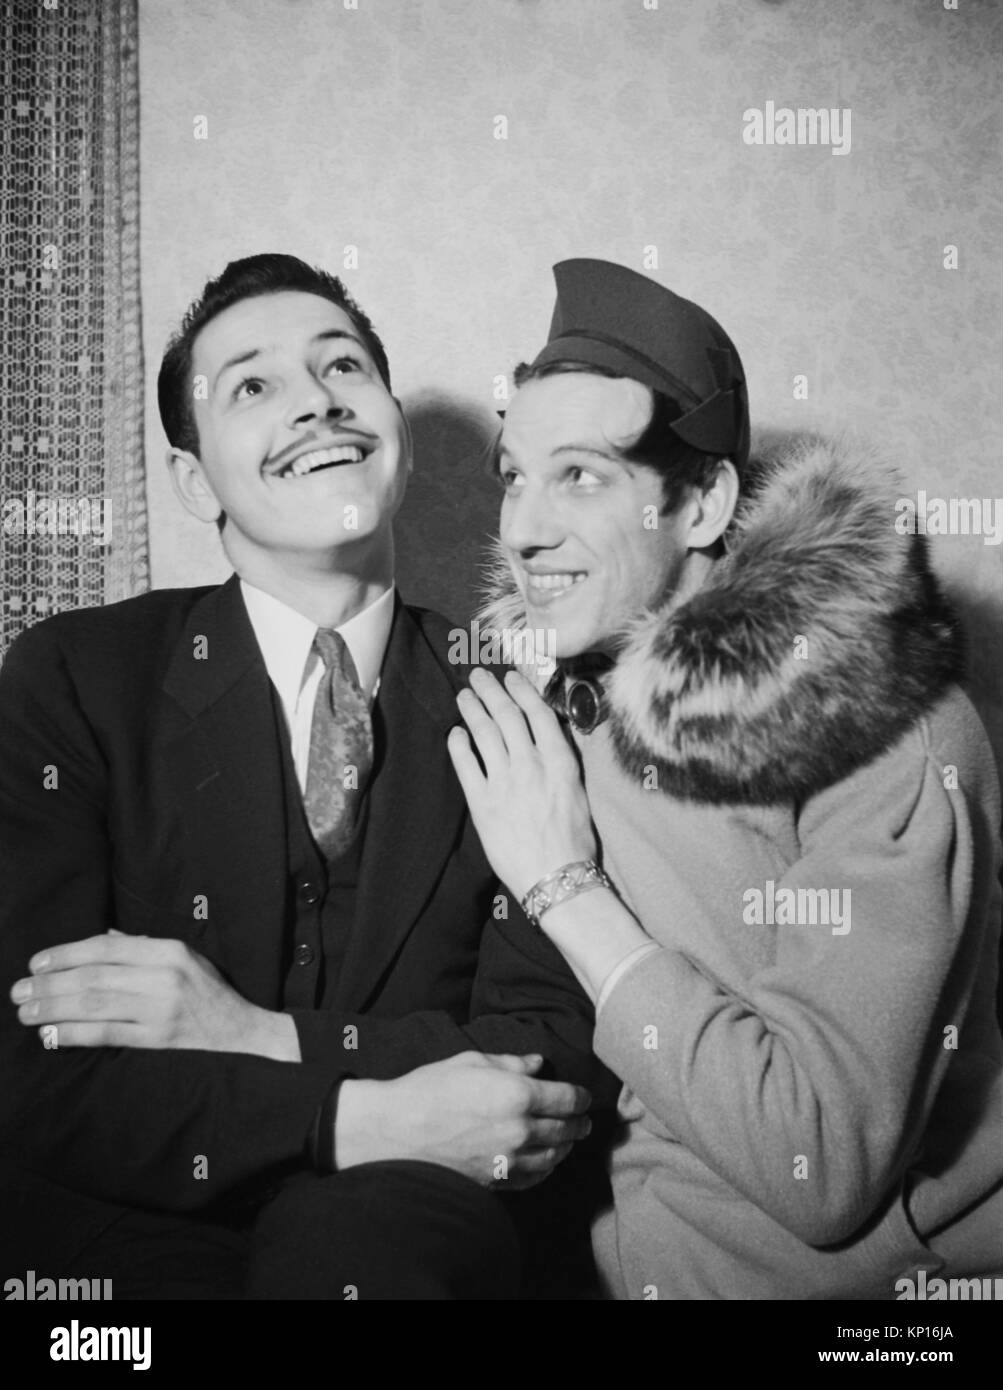 1937 Man in drag and Clack Gable lookalike amateur dramatics photoshoot Stock Photo